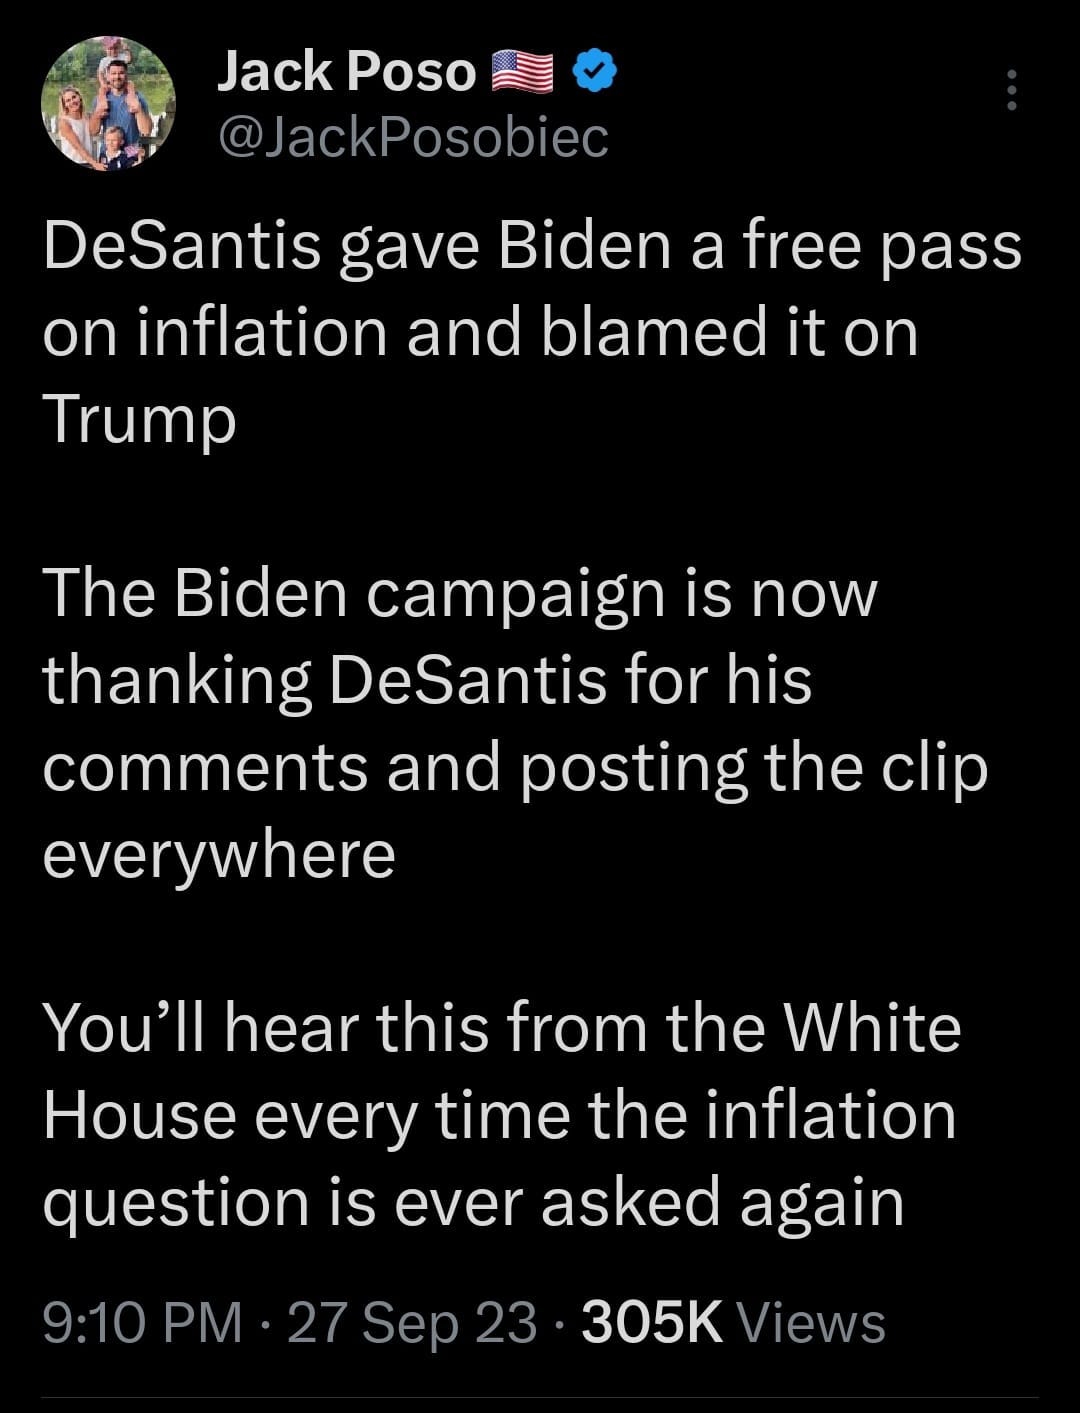 May be an image of 1 person, the Oval Office and text that says 'Jack Poso @JackPosobiec DeSantis gave Biden a free pass on inflation and blamed it on Trump The Biden campaign is now thanking DeSantis for his comments and posting the clip everywhere You'll hear this from the White House every time the inflation question is ever asked again 9:10 PM 27 Sep 23 305K Views'